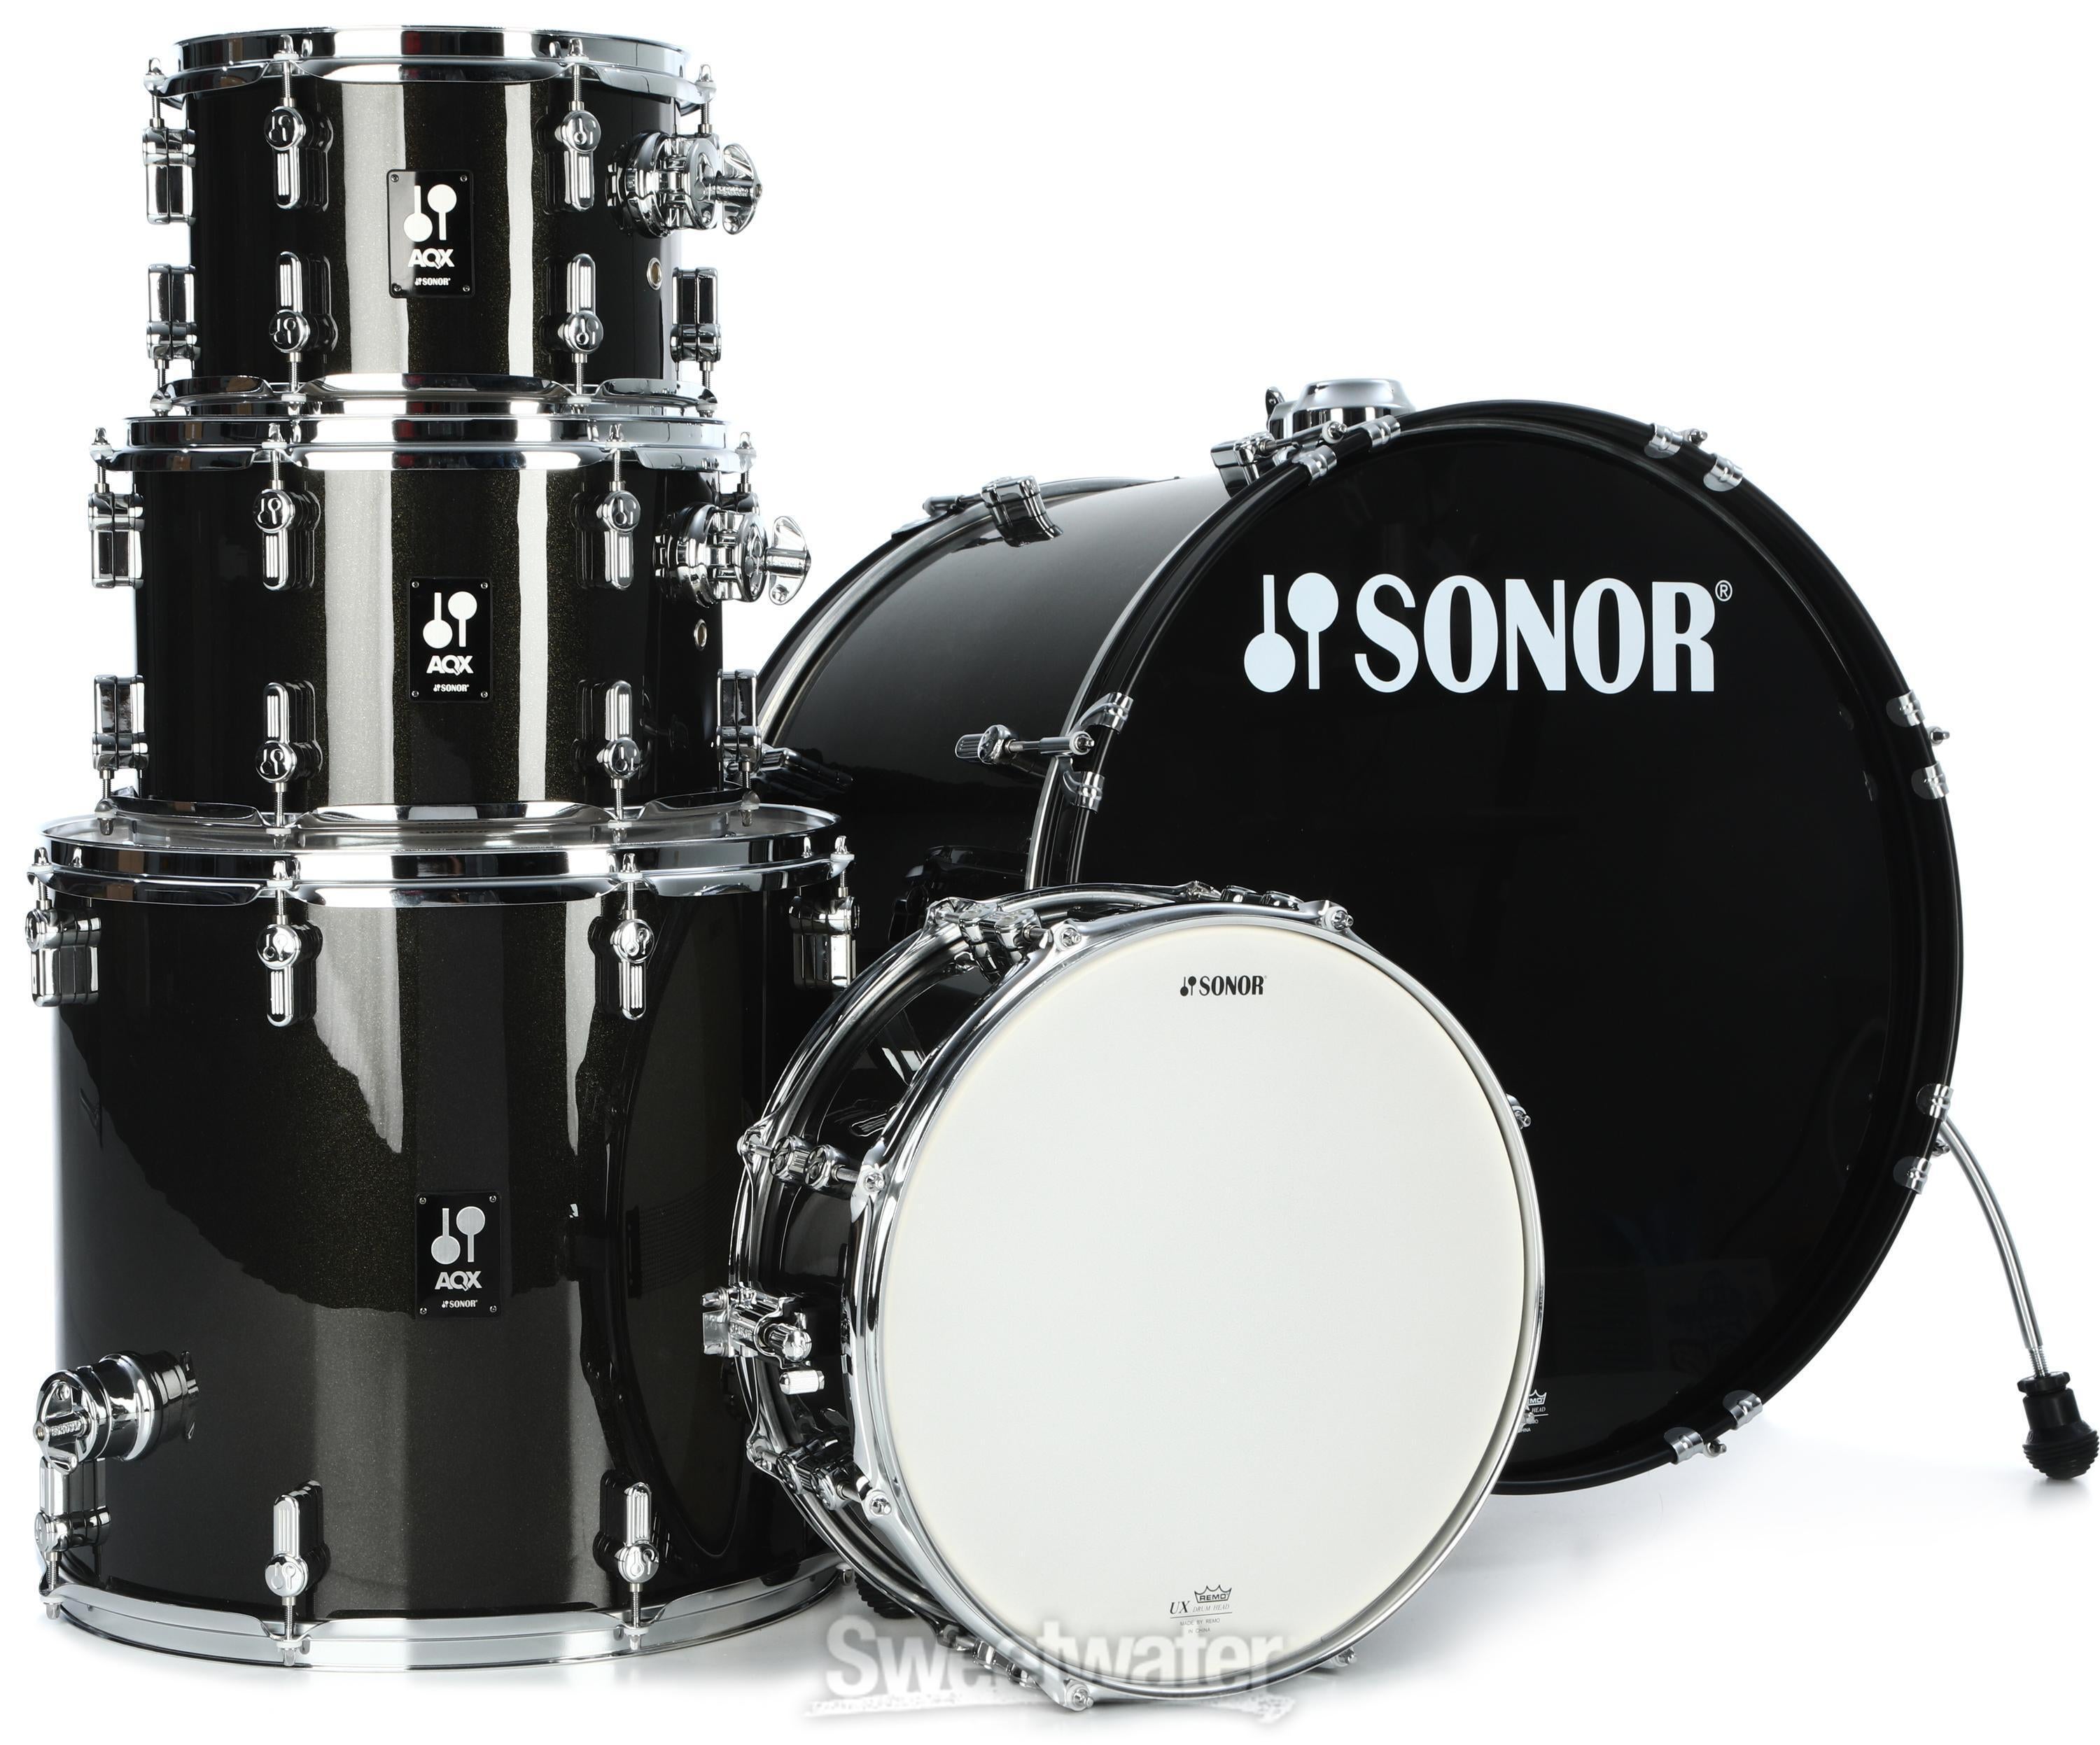 Sonor AQX Stage 5-piece Drum Set with Hardware Pack - Black 